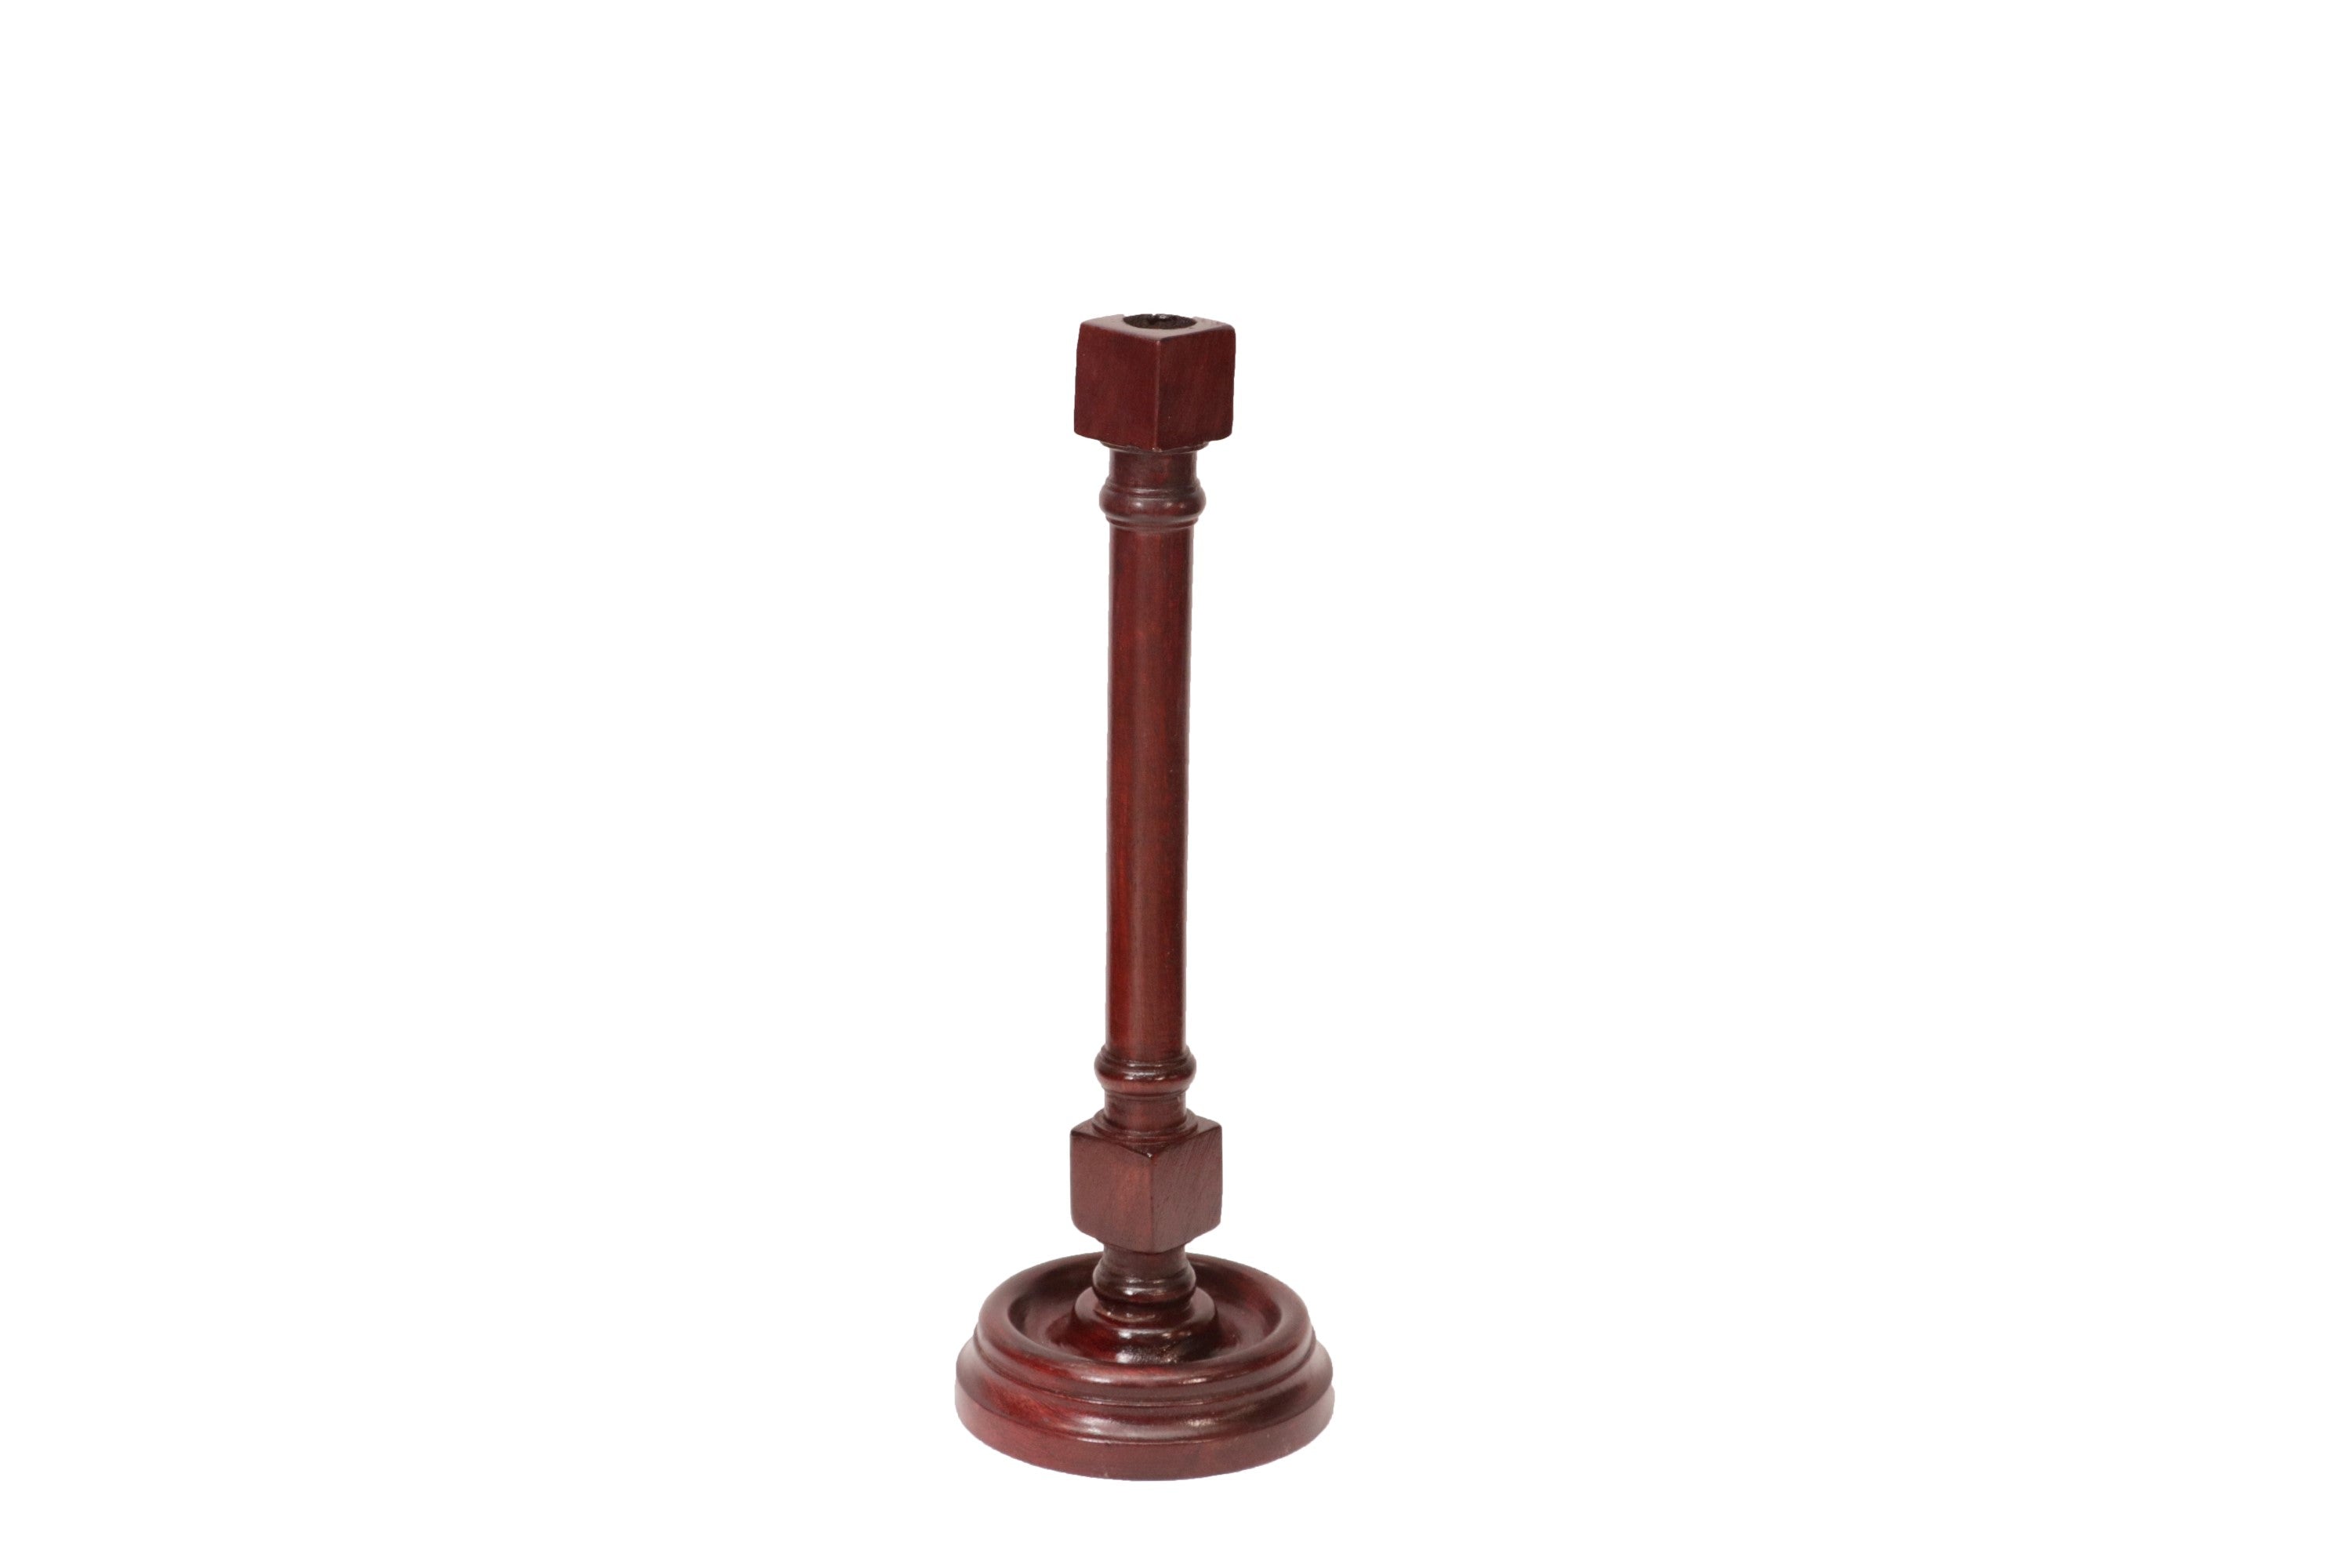 Slim Pillar Wooden Candle Holder small size (5 x 5 x 16 Inch) Candle Holder